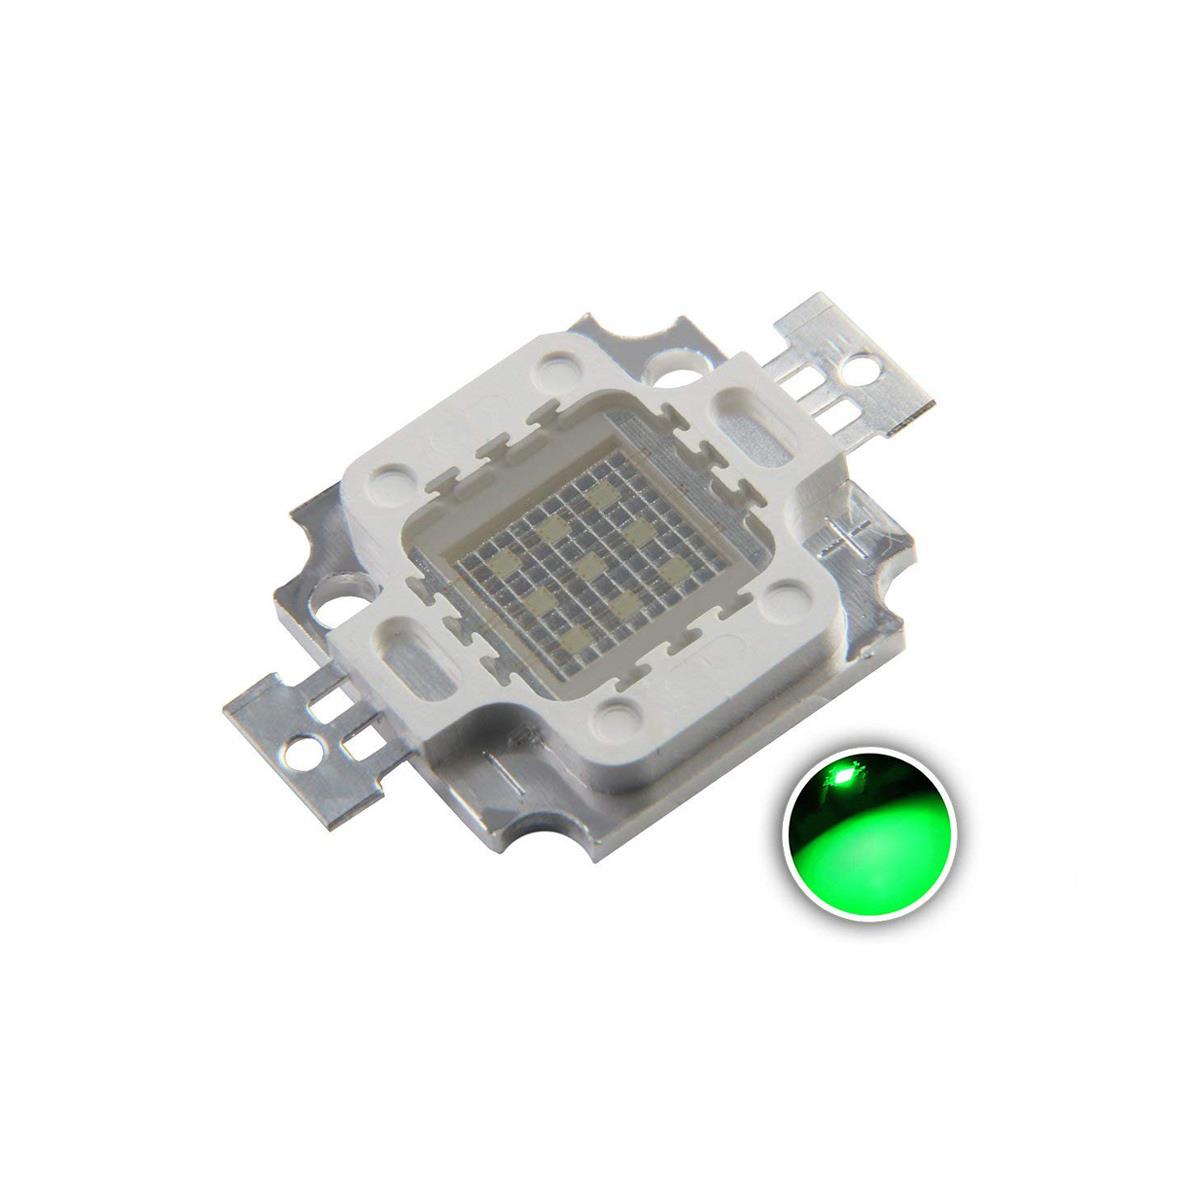 High Power Led Chip 10W Green